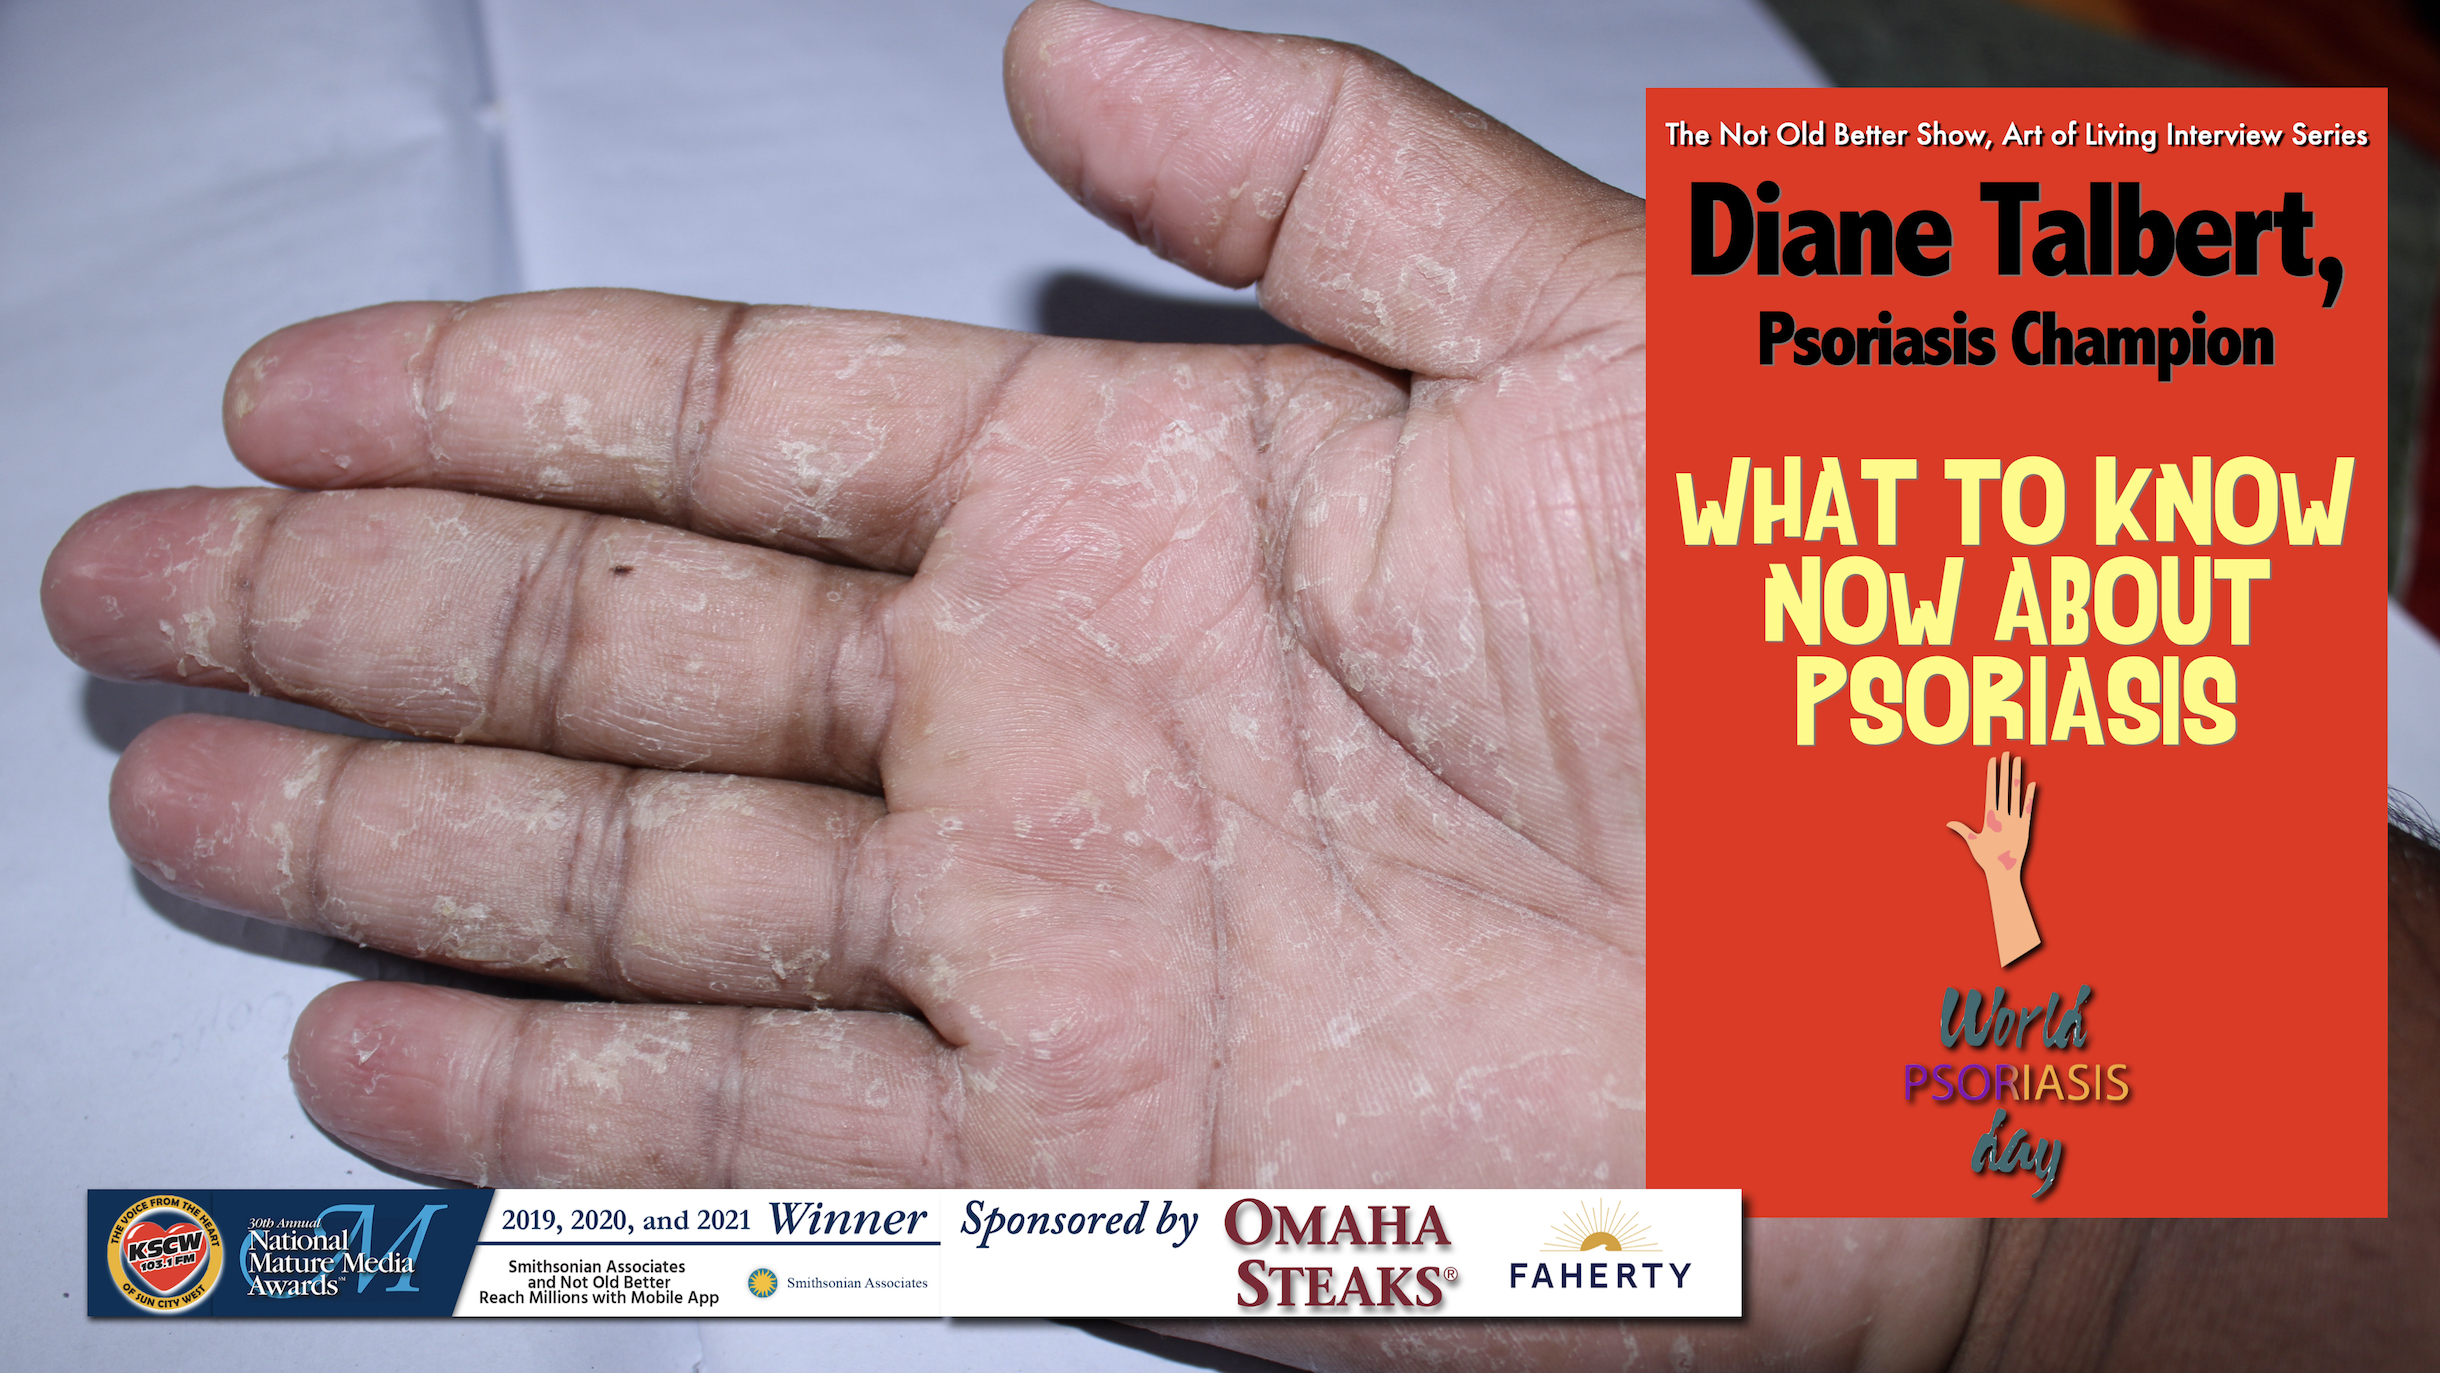 Psoriasis Disease and What You Should Know – Diane Talbert